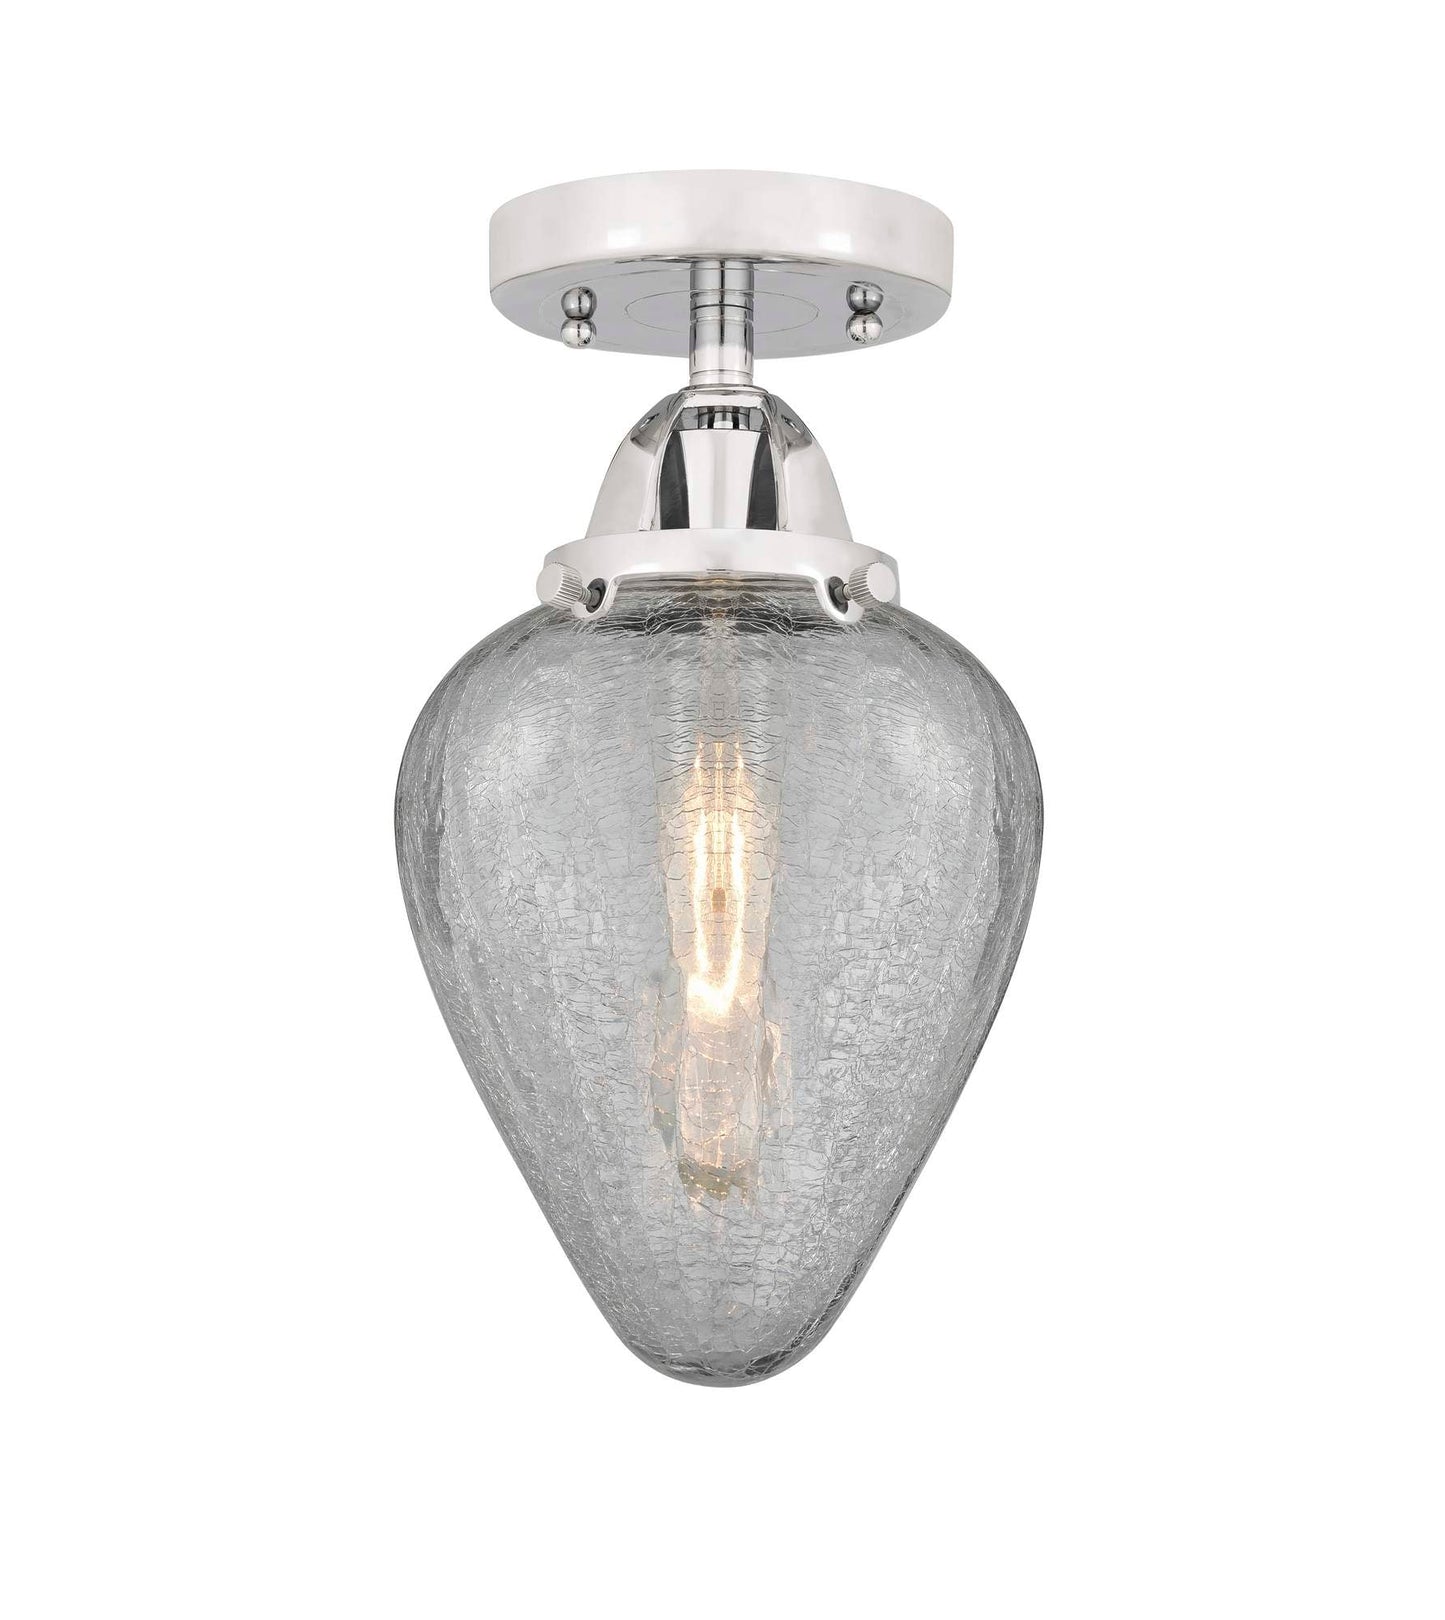 288-1C-PC-G165 1-Light 6.5" Polished Chrome Semi-Flush Mount - Clear Crackle Geneseo Glass - LED Bulb - Dimmensions: 6.5 x 6.5 x 12.25 - Sloped Ceiling Compatible: No